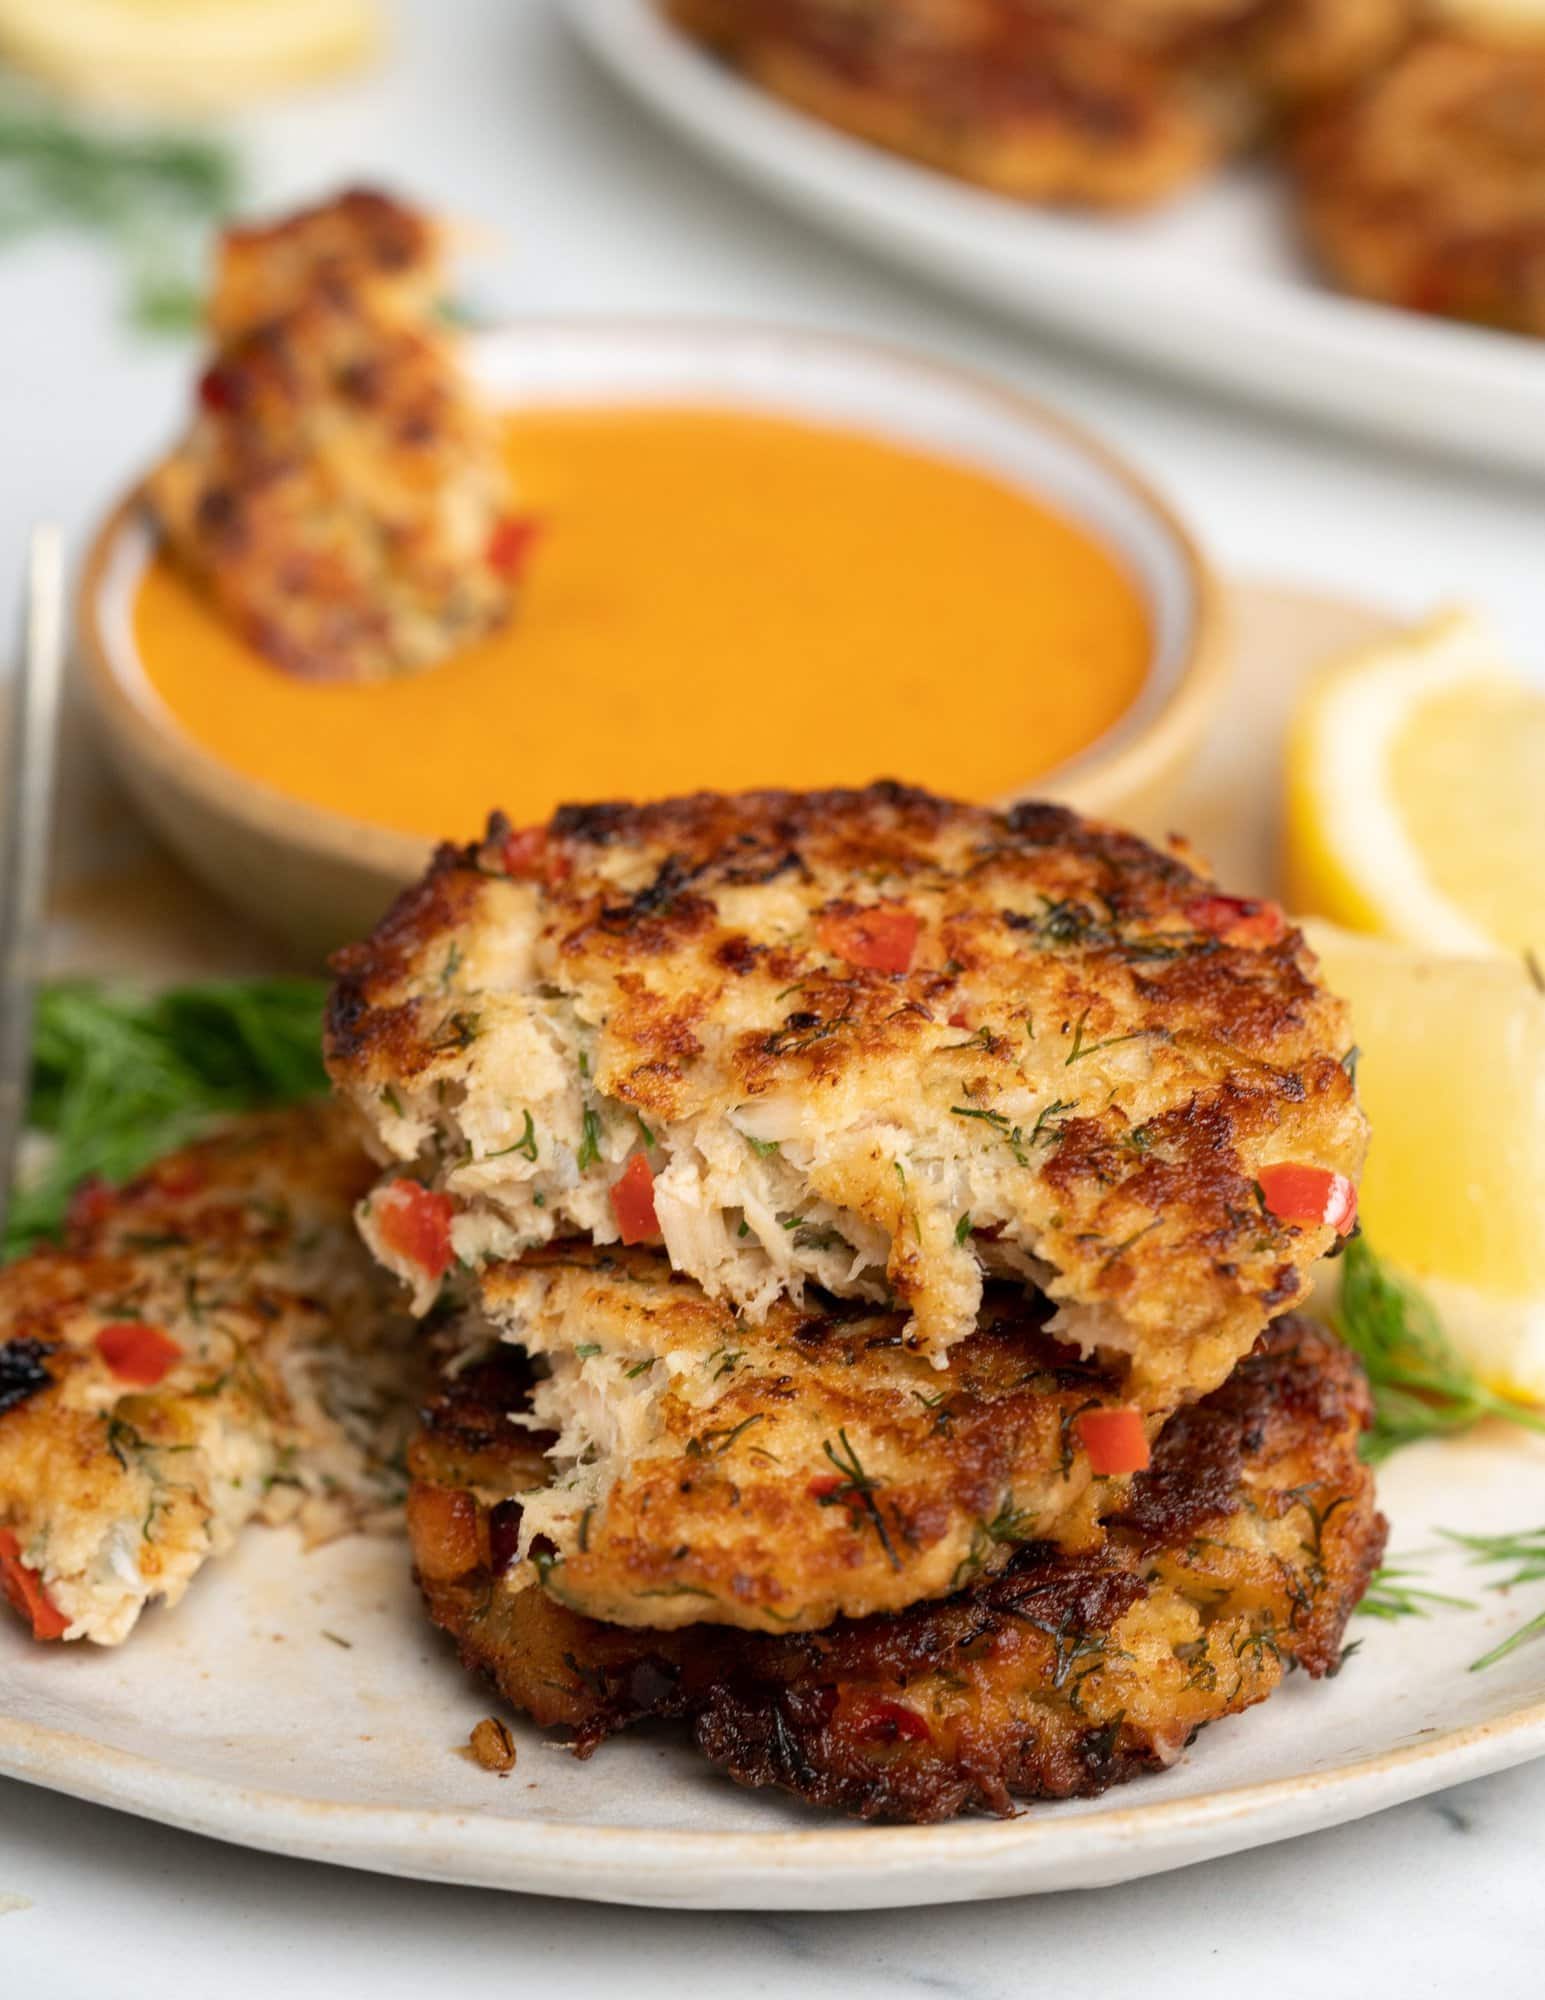 These salmon patties are crispy on the outside while moist and flavourful on the inside. With tender flakey salmon bites, these patties ( or salmon cakes) can be made both with fresh and canned salmons